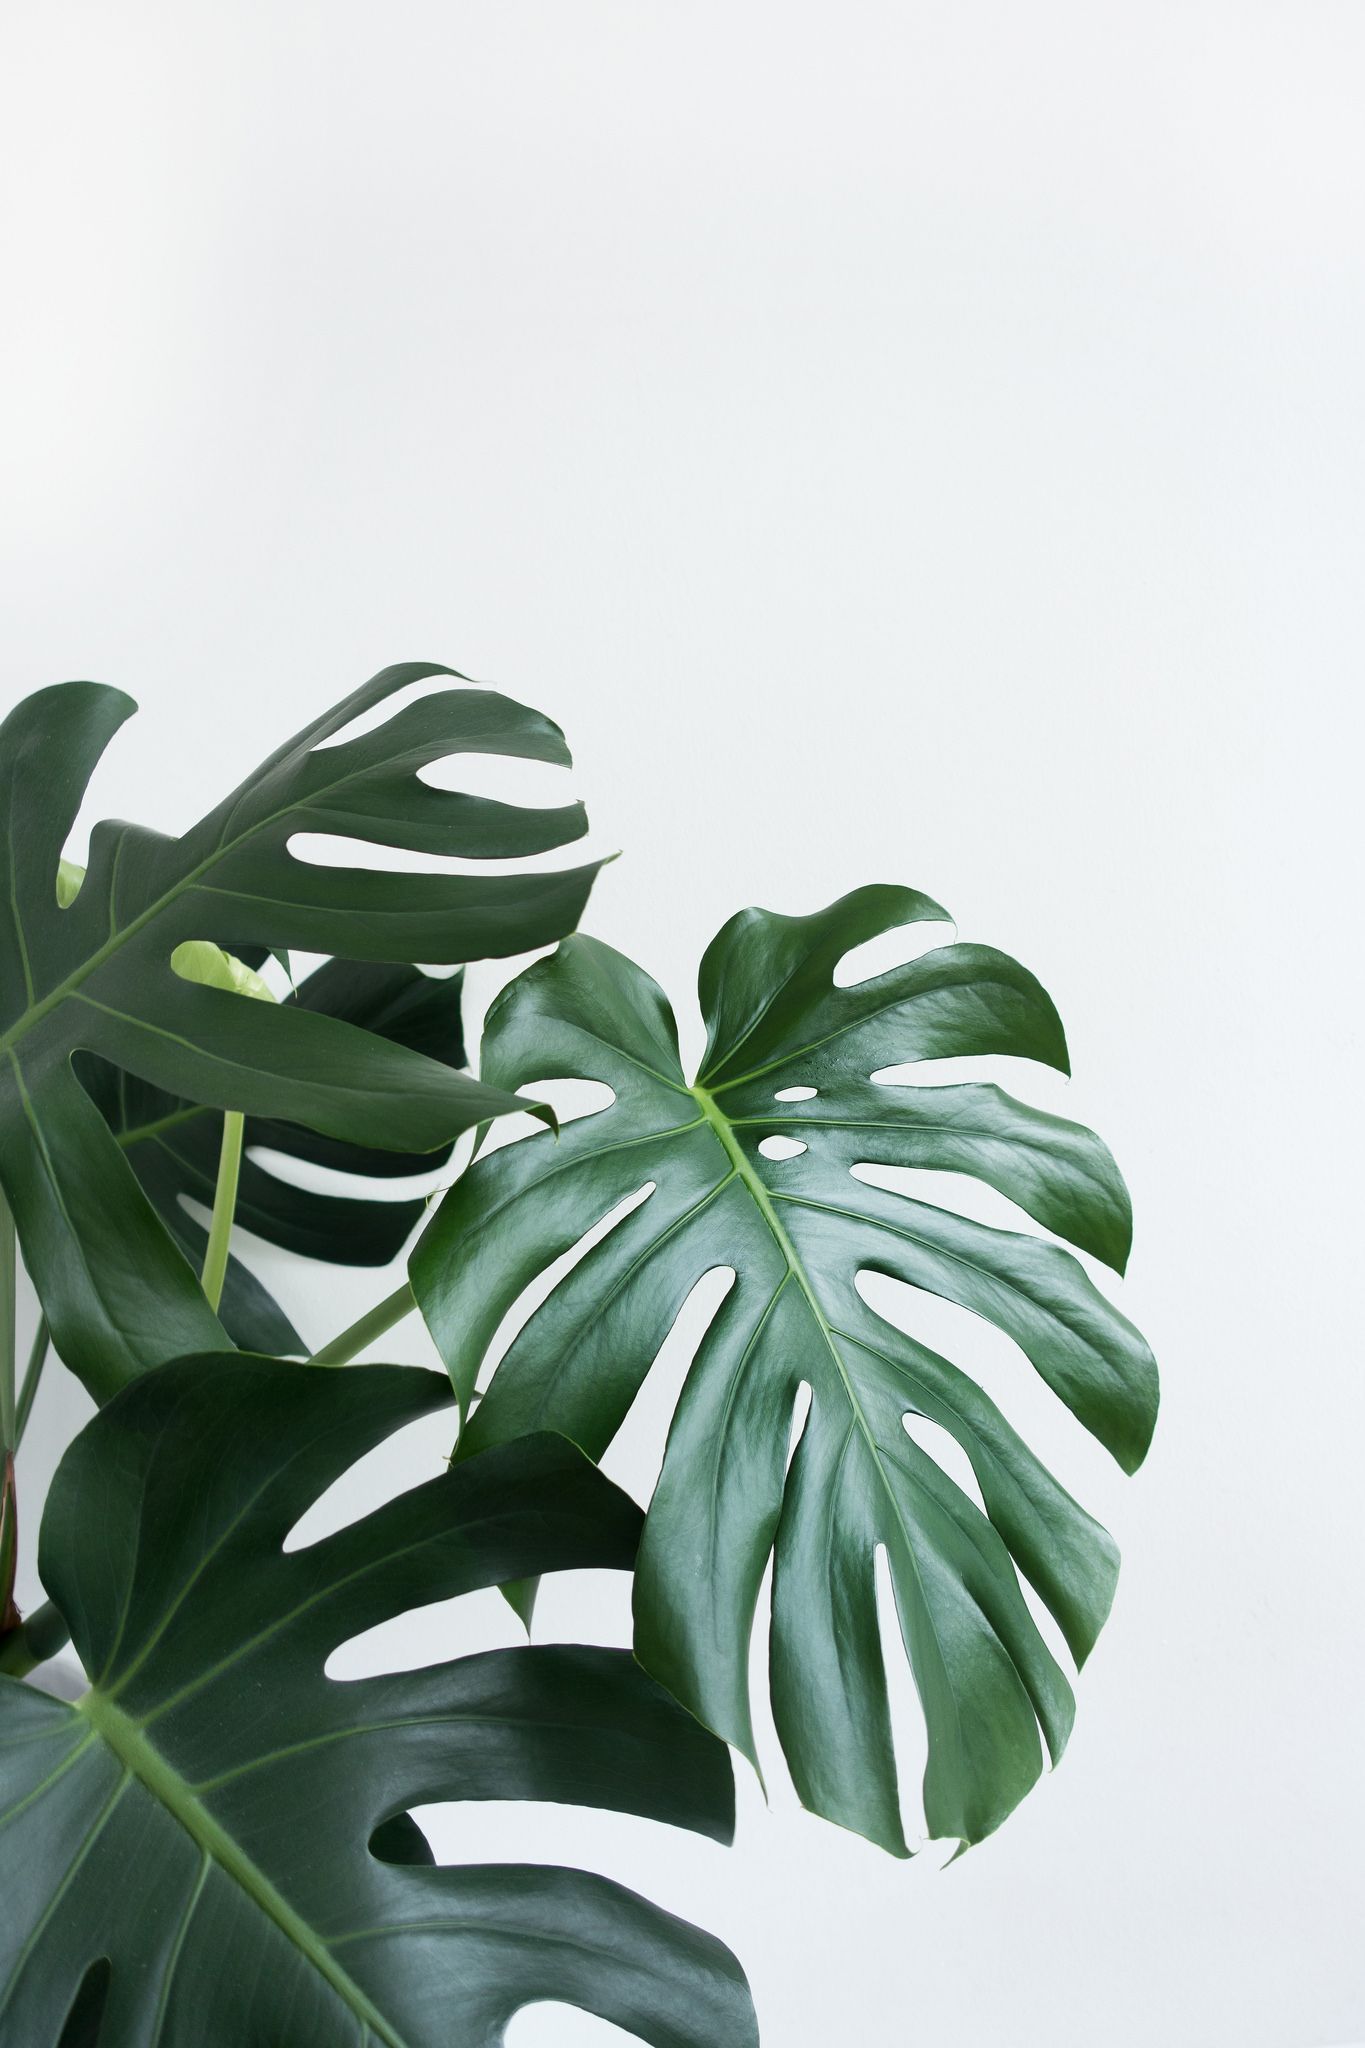 A large plant with green leaves on it - Plants, Monstera